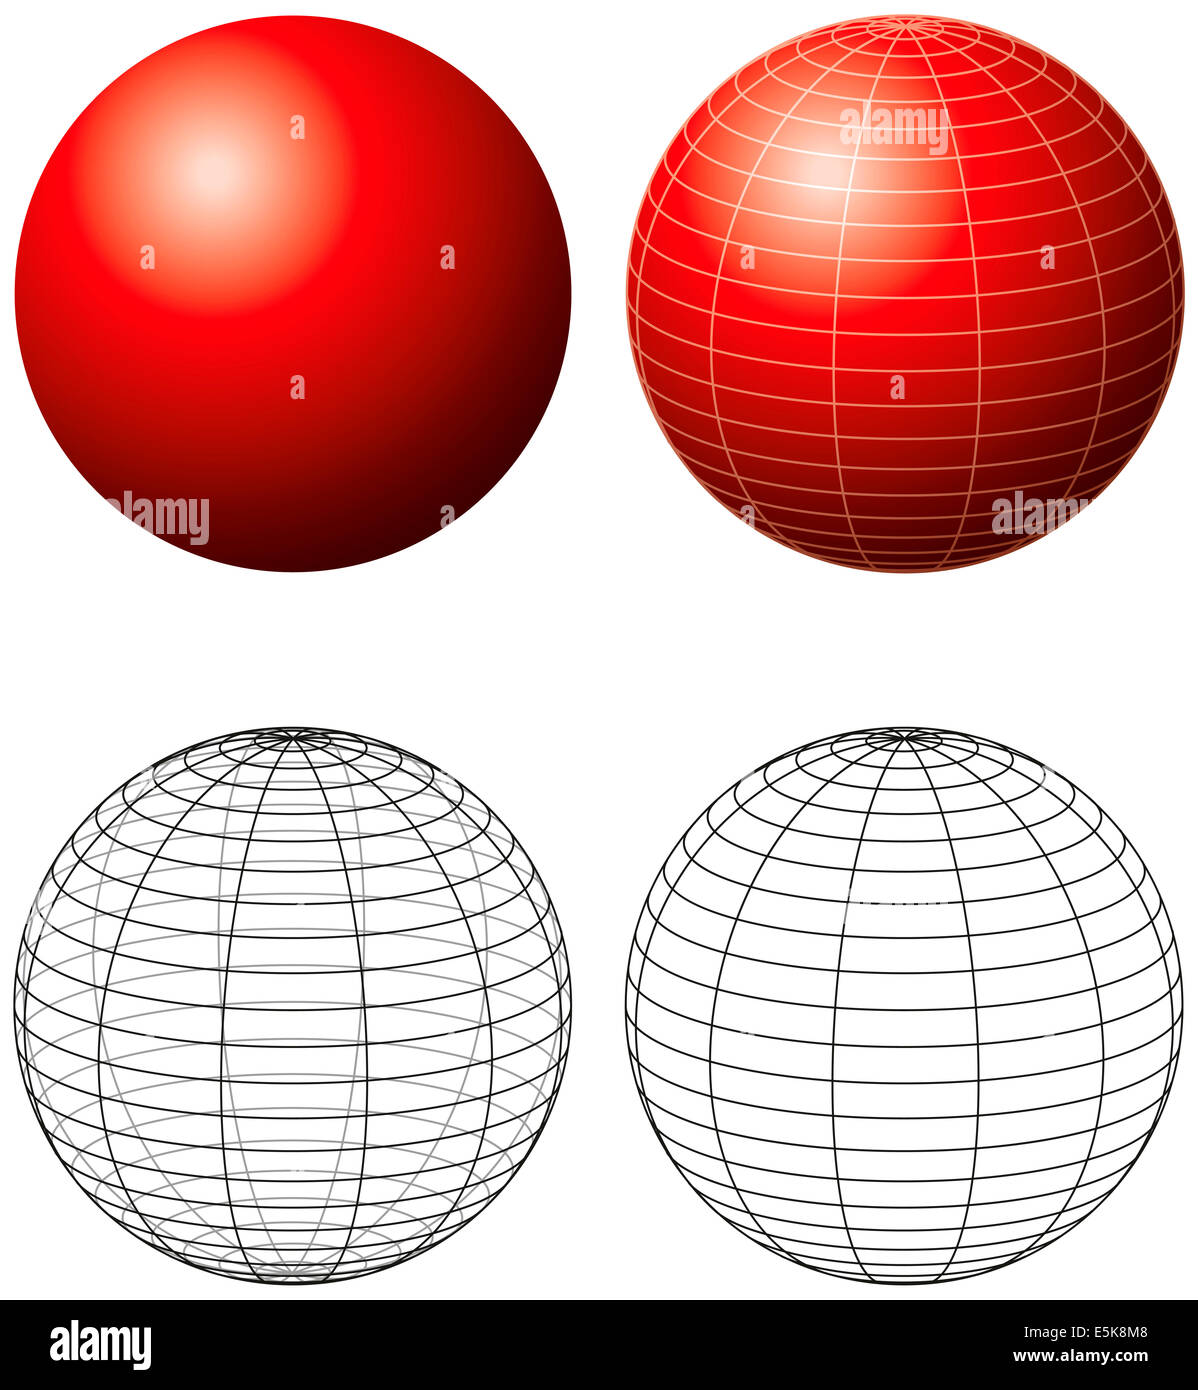 Red Sphere With Meridians - Three-dimensional red sphere with grid-lines and outline version. Illustration on white background. Stock Photo